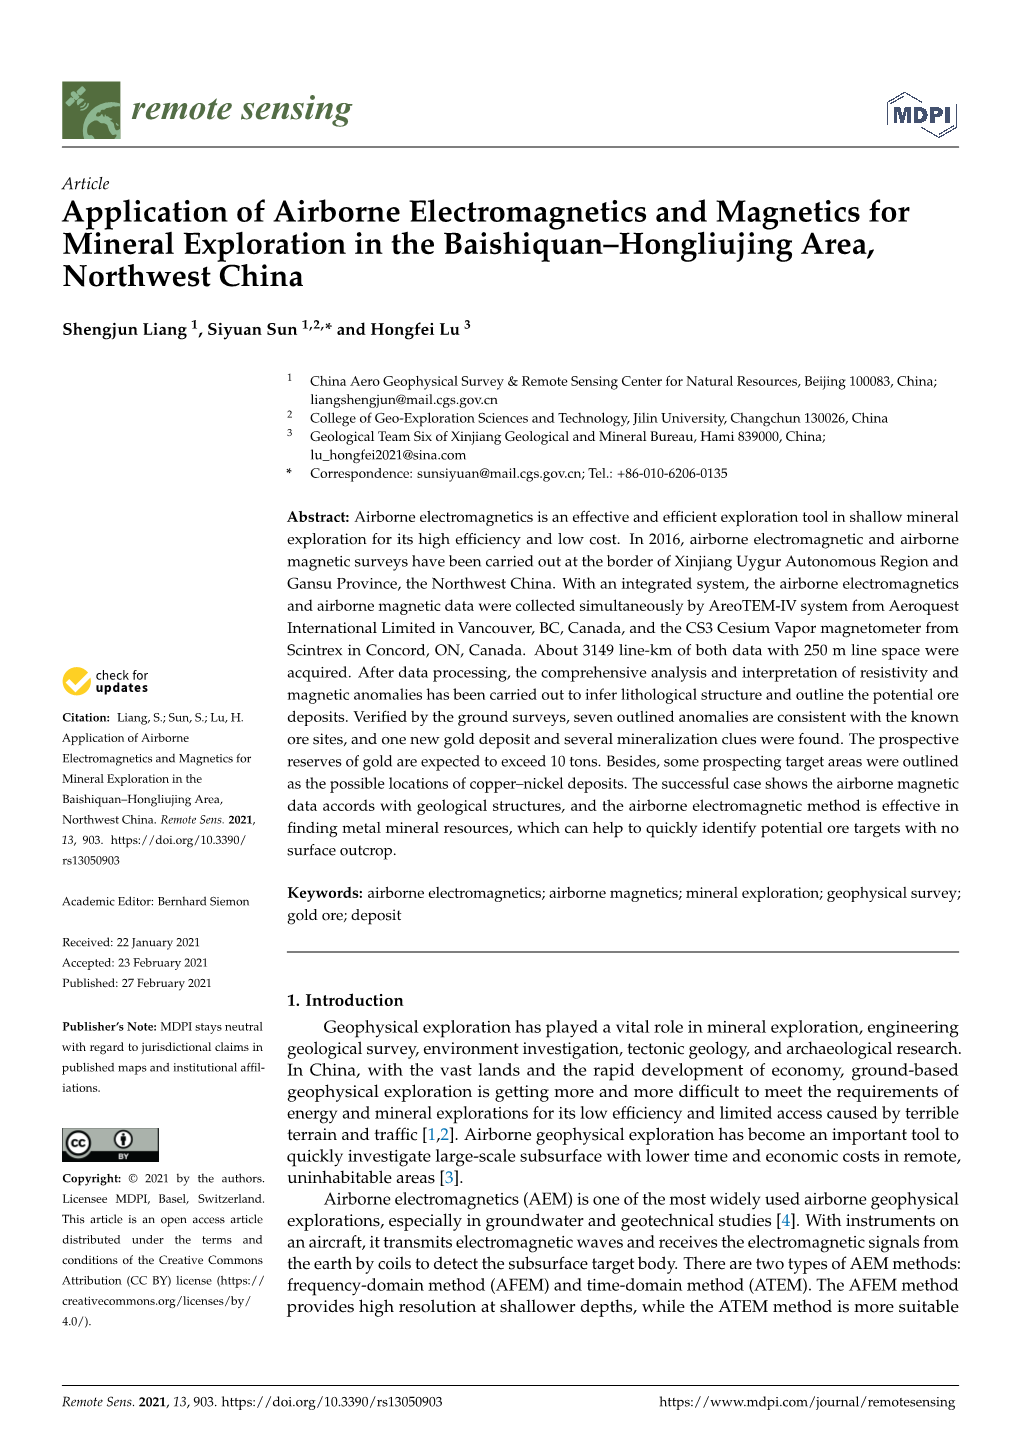 Application of Airborne Electromagnetics and Magnetics for Mineral Exploration in the Baishiquan–Hongliujing Area, Northwest China